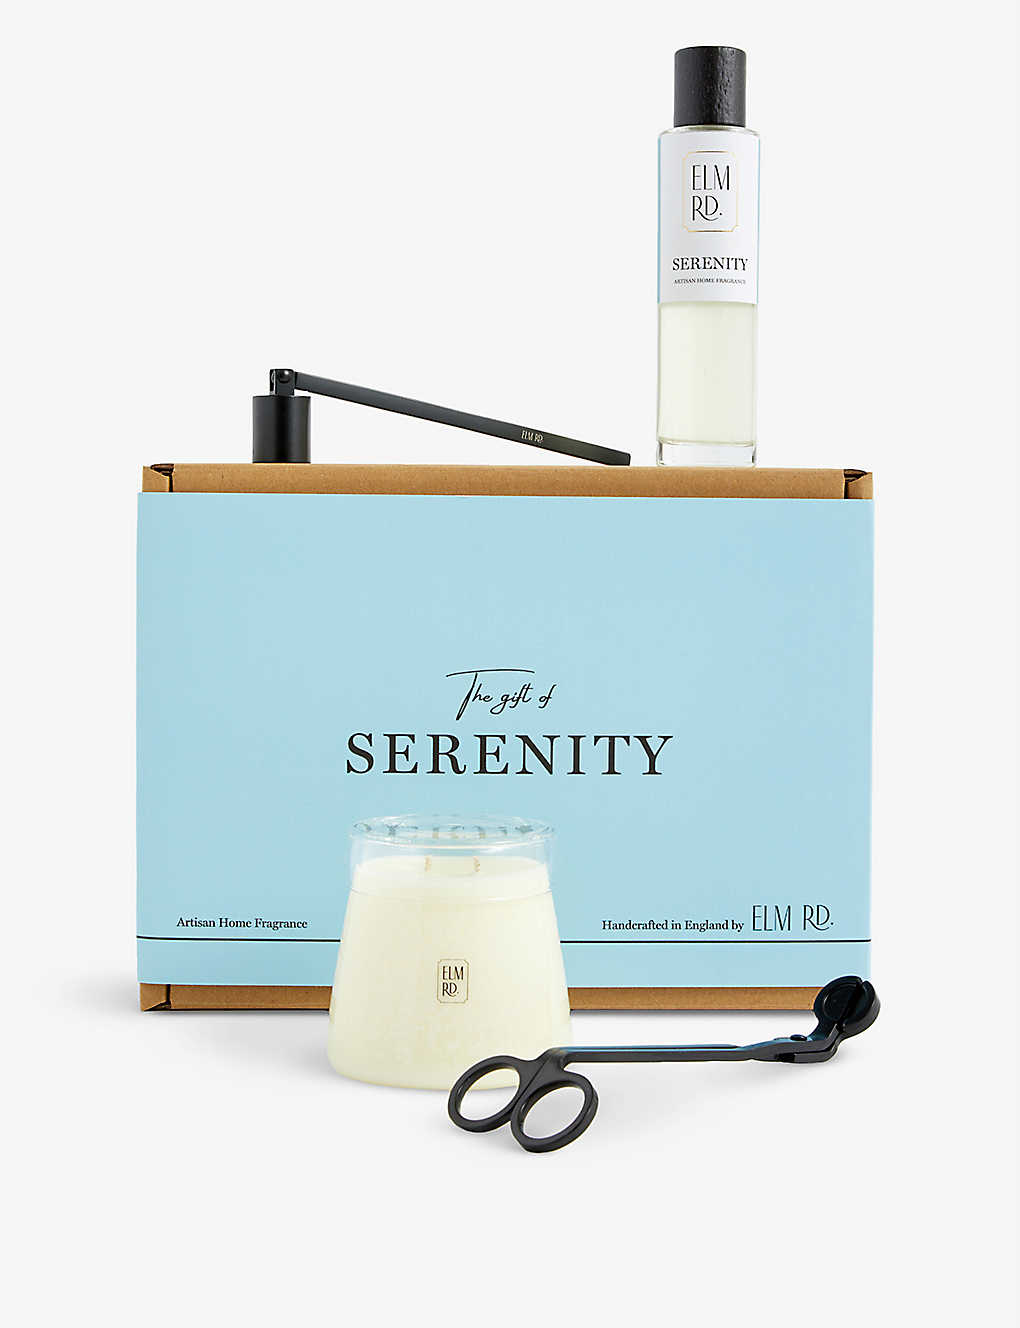 A SOUTH LONDON MAKERS MARKET ザ・ギフト オブ セレニティー フレグランスセット The Gift of Serenity fragrance set CLEAR